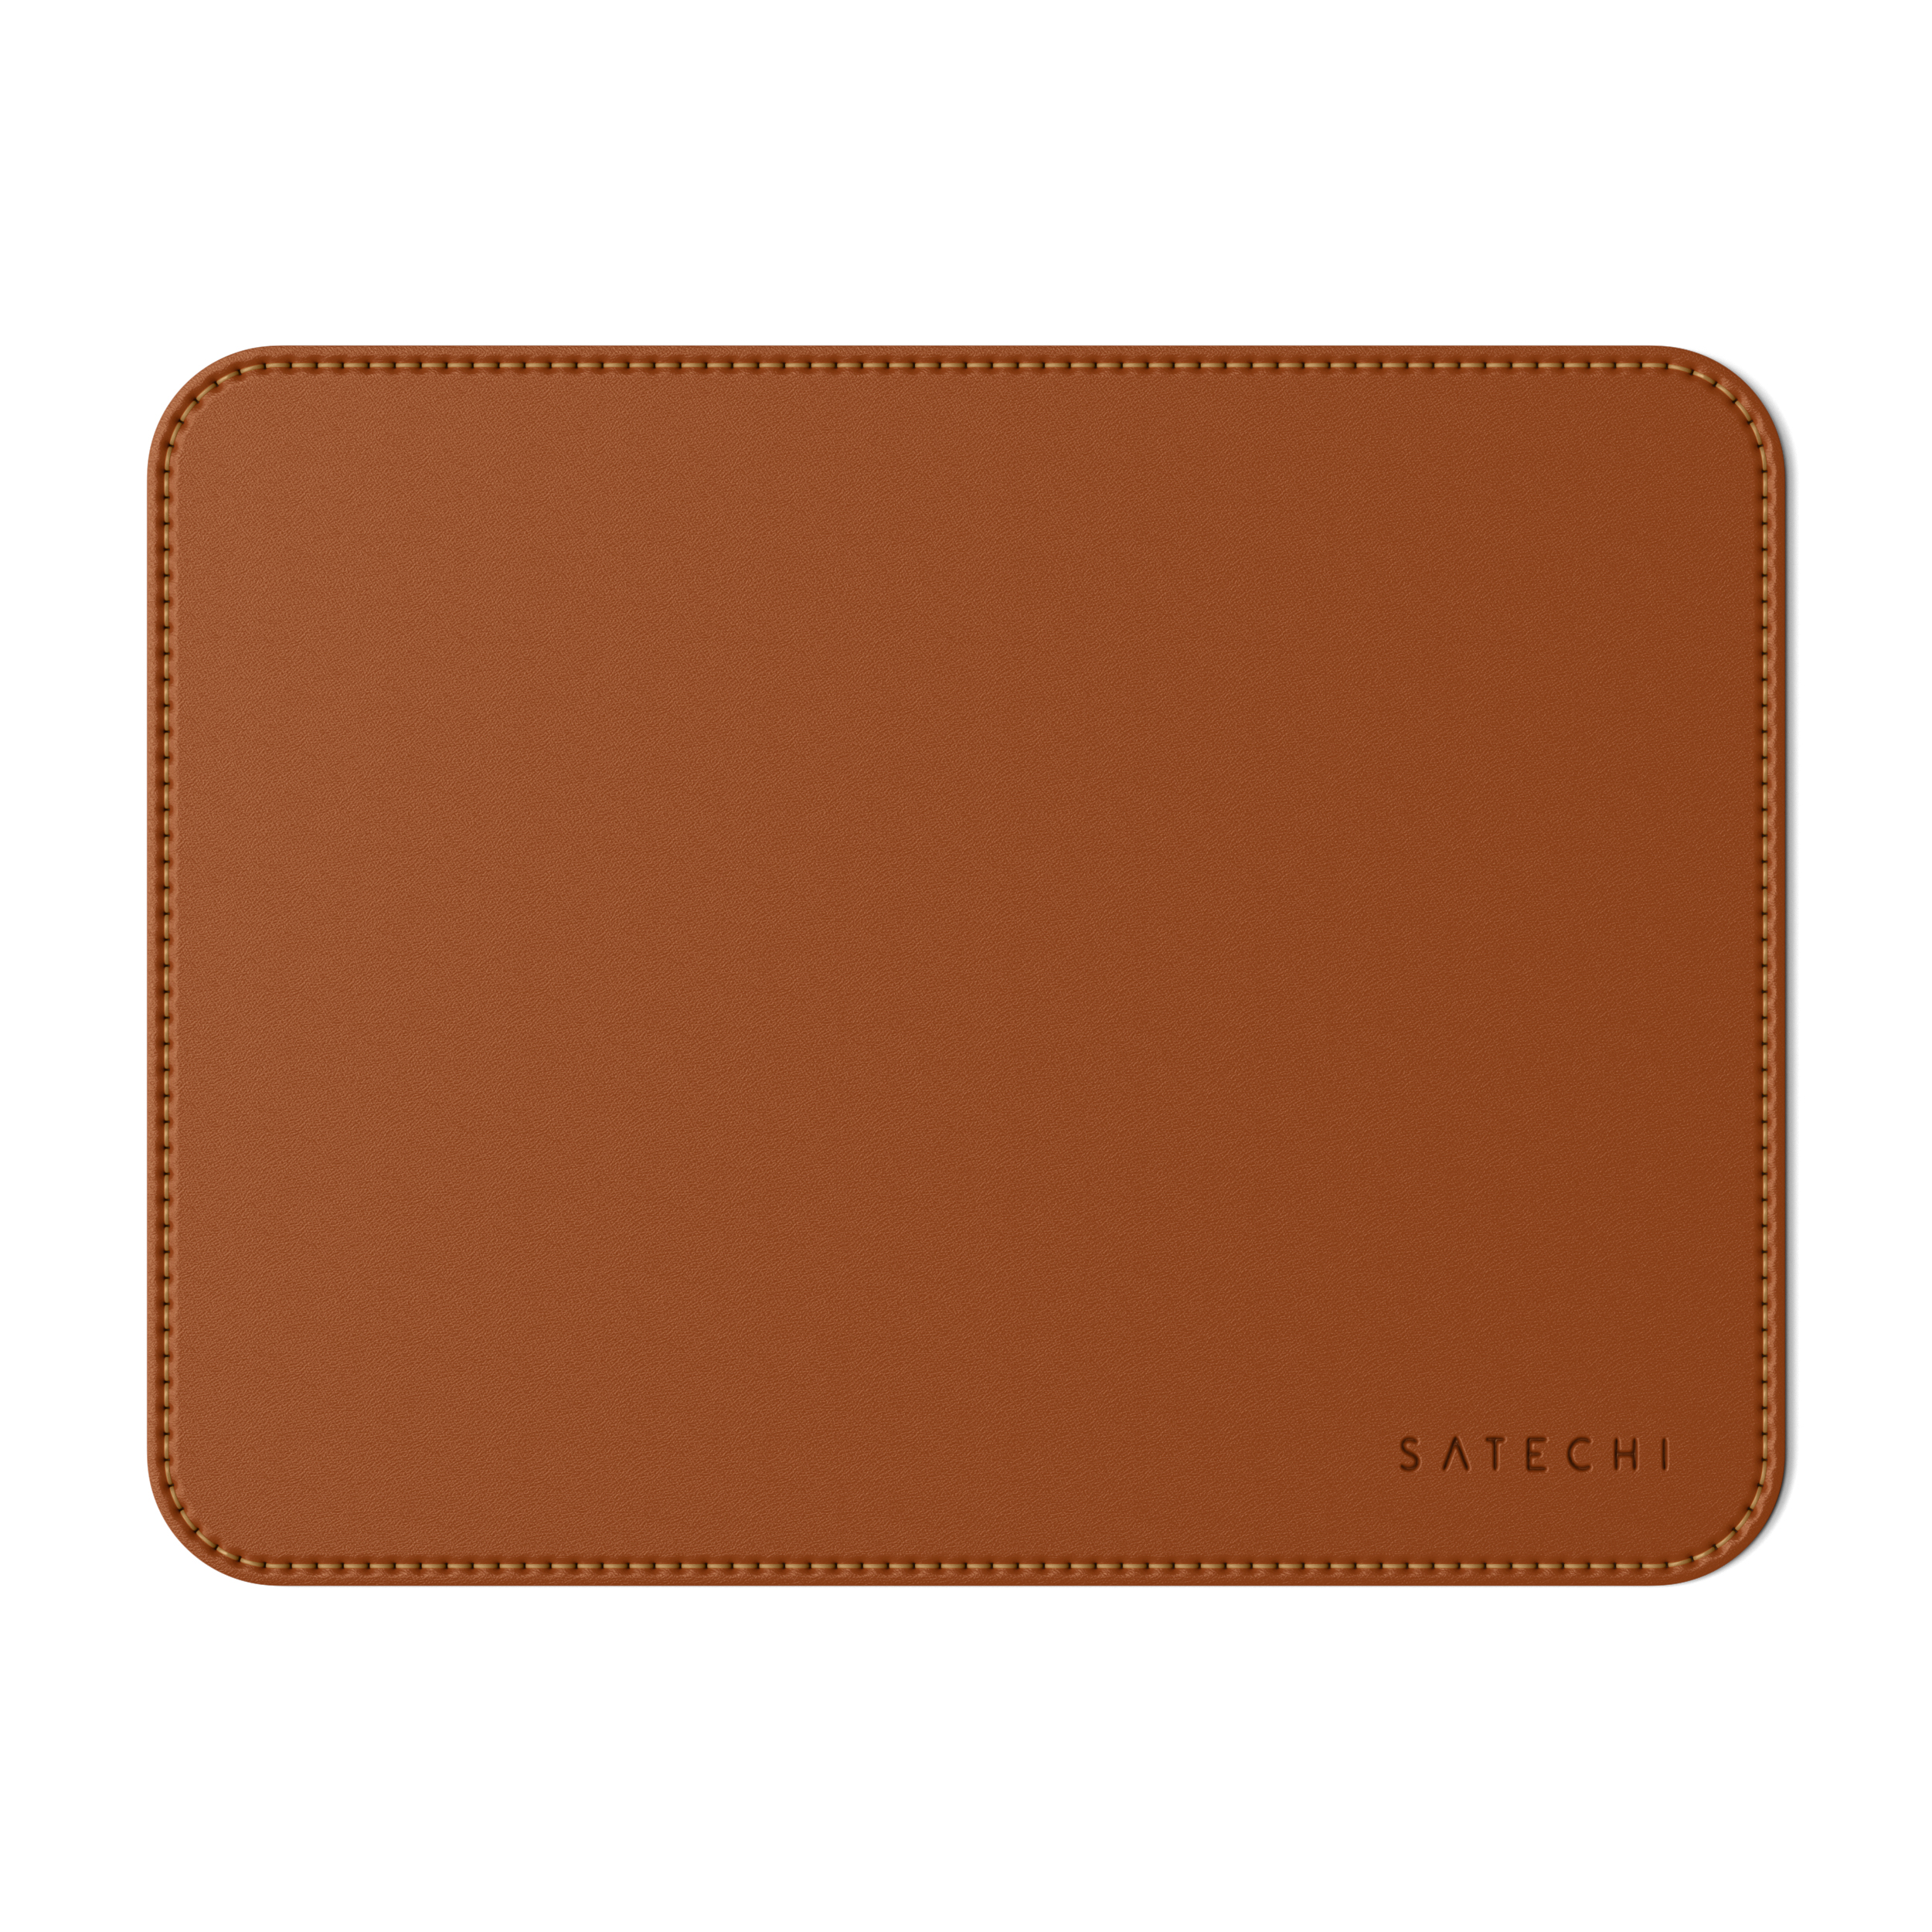 24,89 cm) Eco-Leather x Mousepad Brown - cm Mouse (19 SATECHI Pad